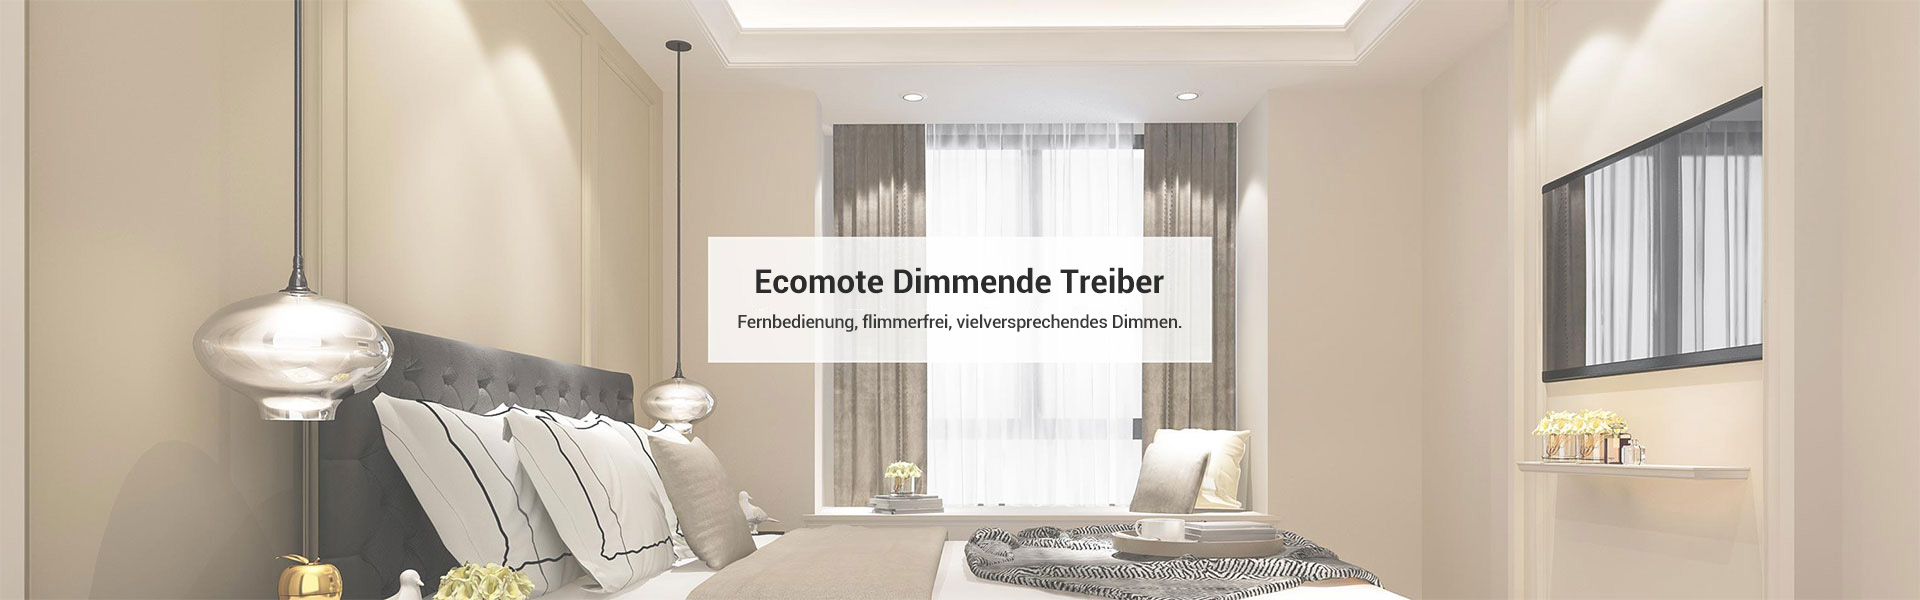 Ecomote Dimming Driver